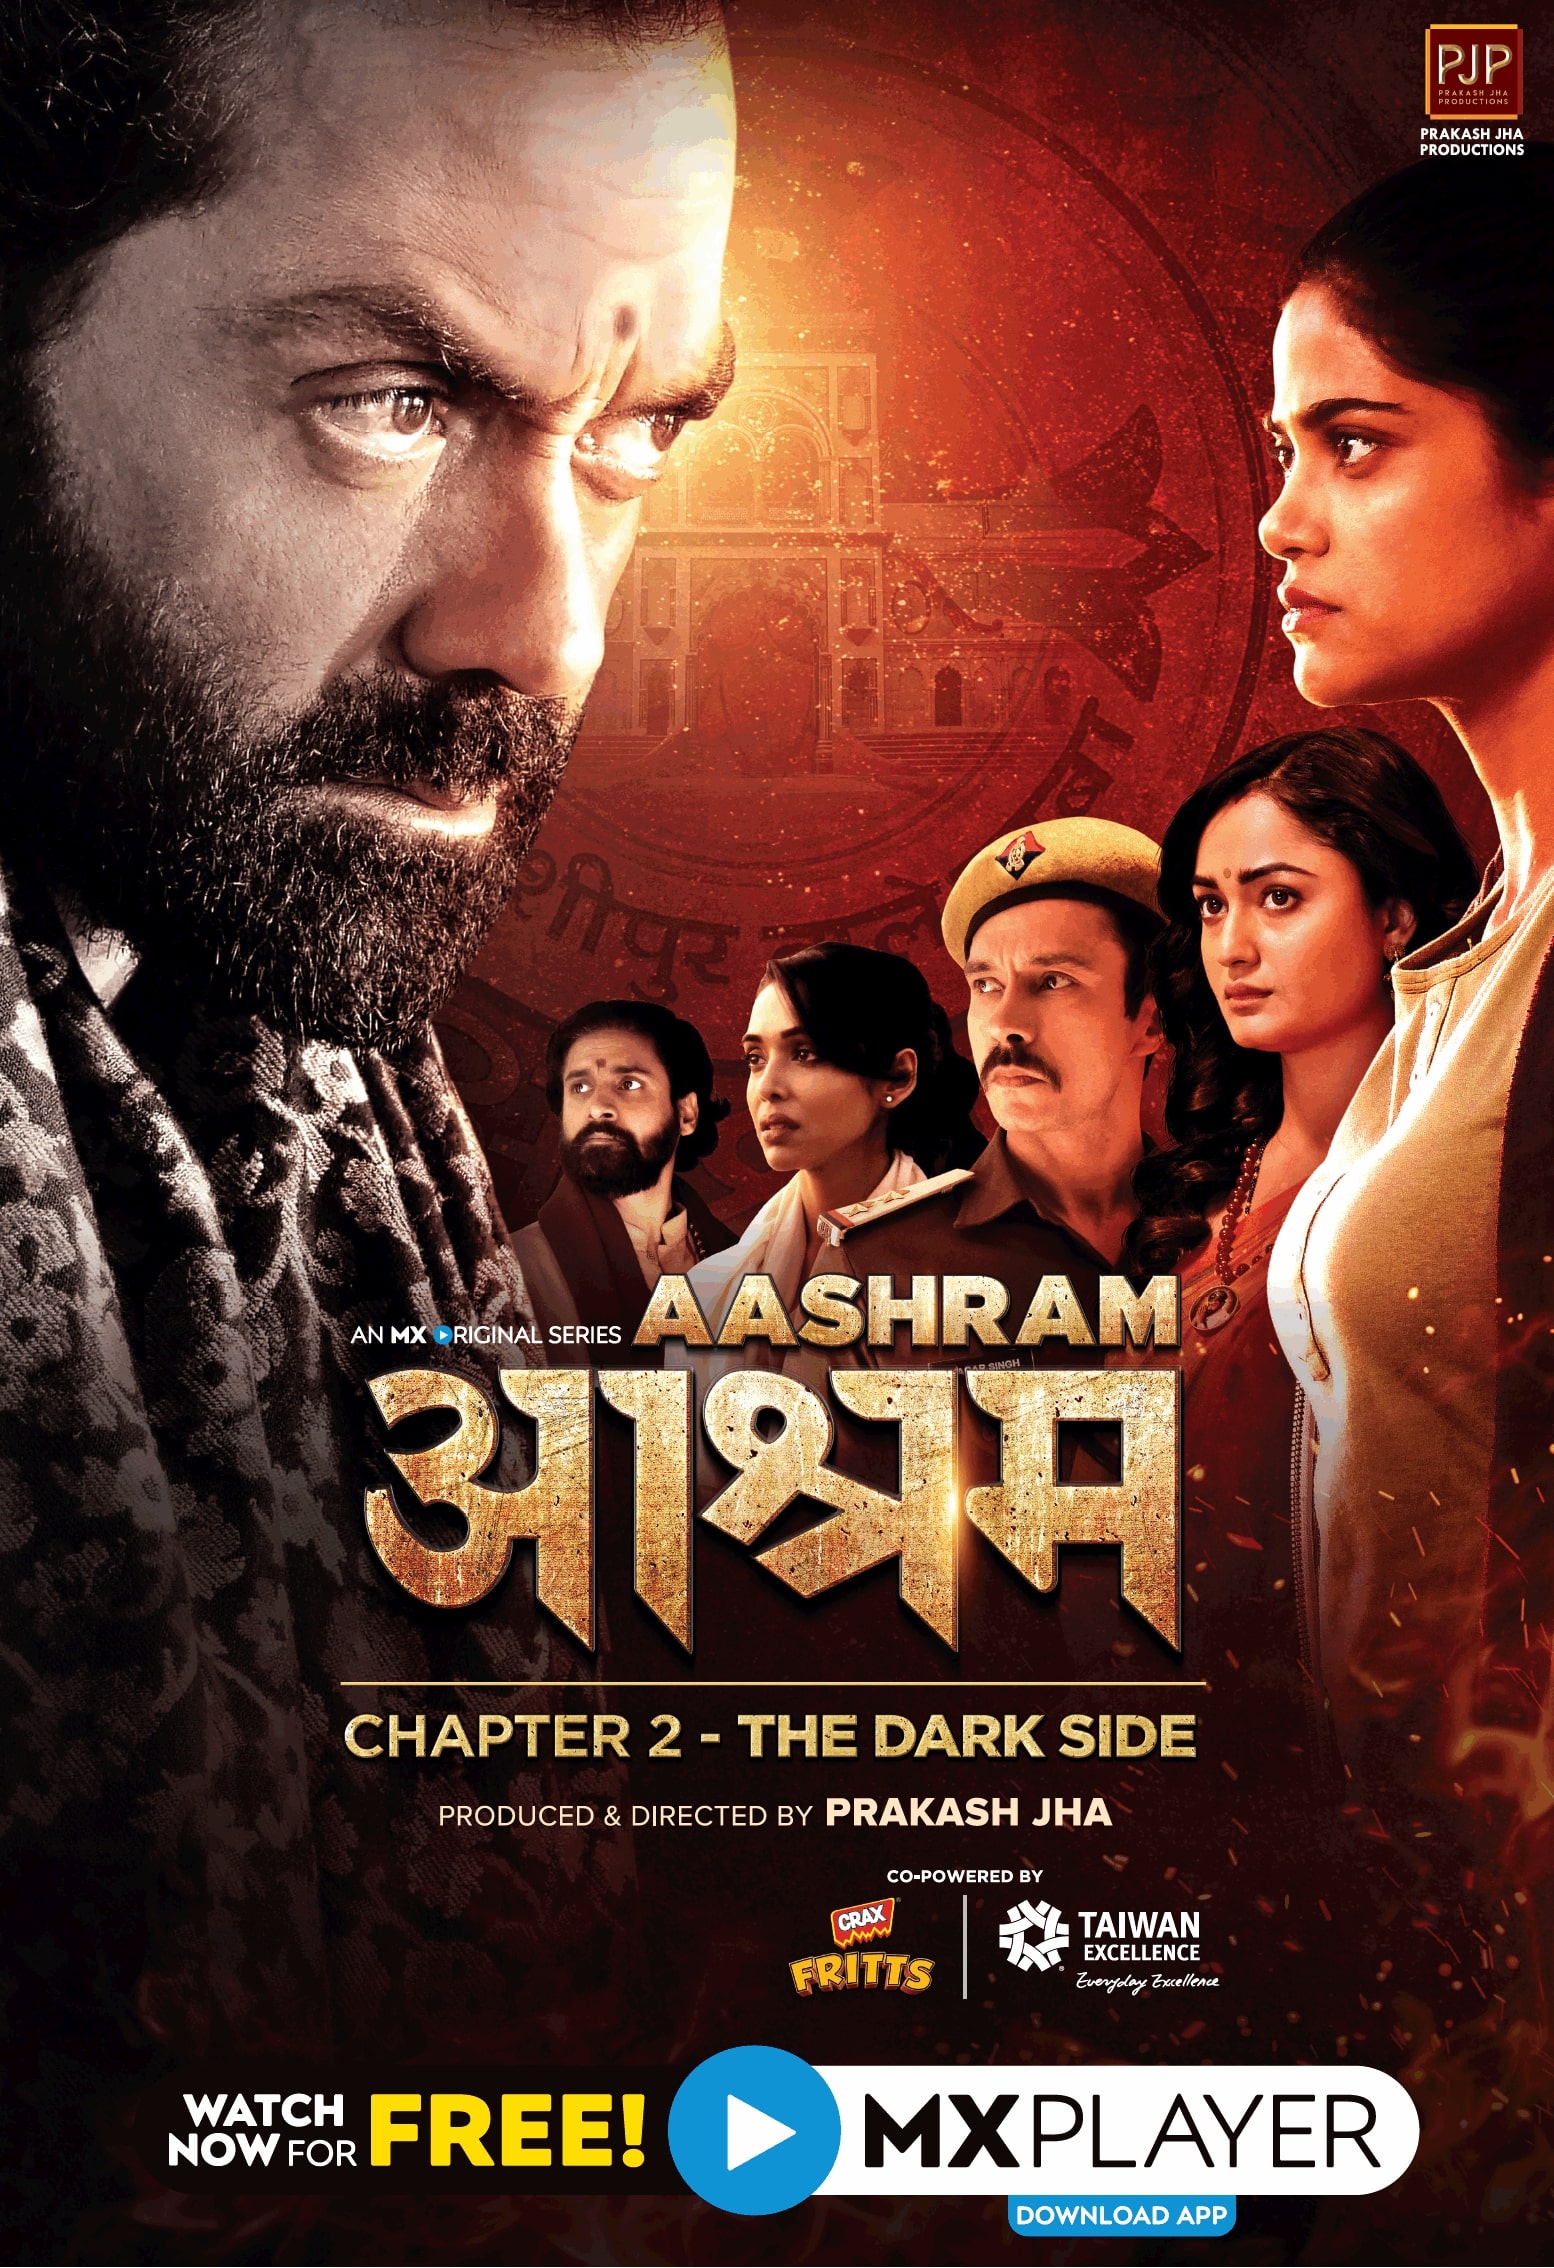 Aashram An Mx Original Series Chapter 2 The Dark Side Watch Now For Free Mx  Player Ad - Advert Gallery